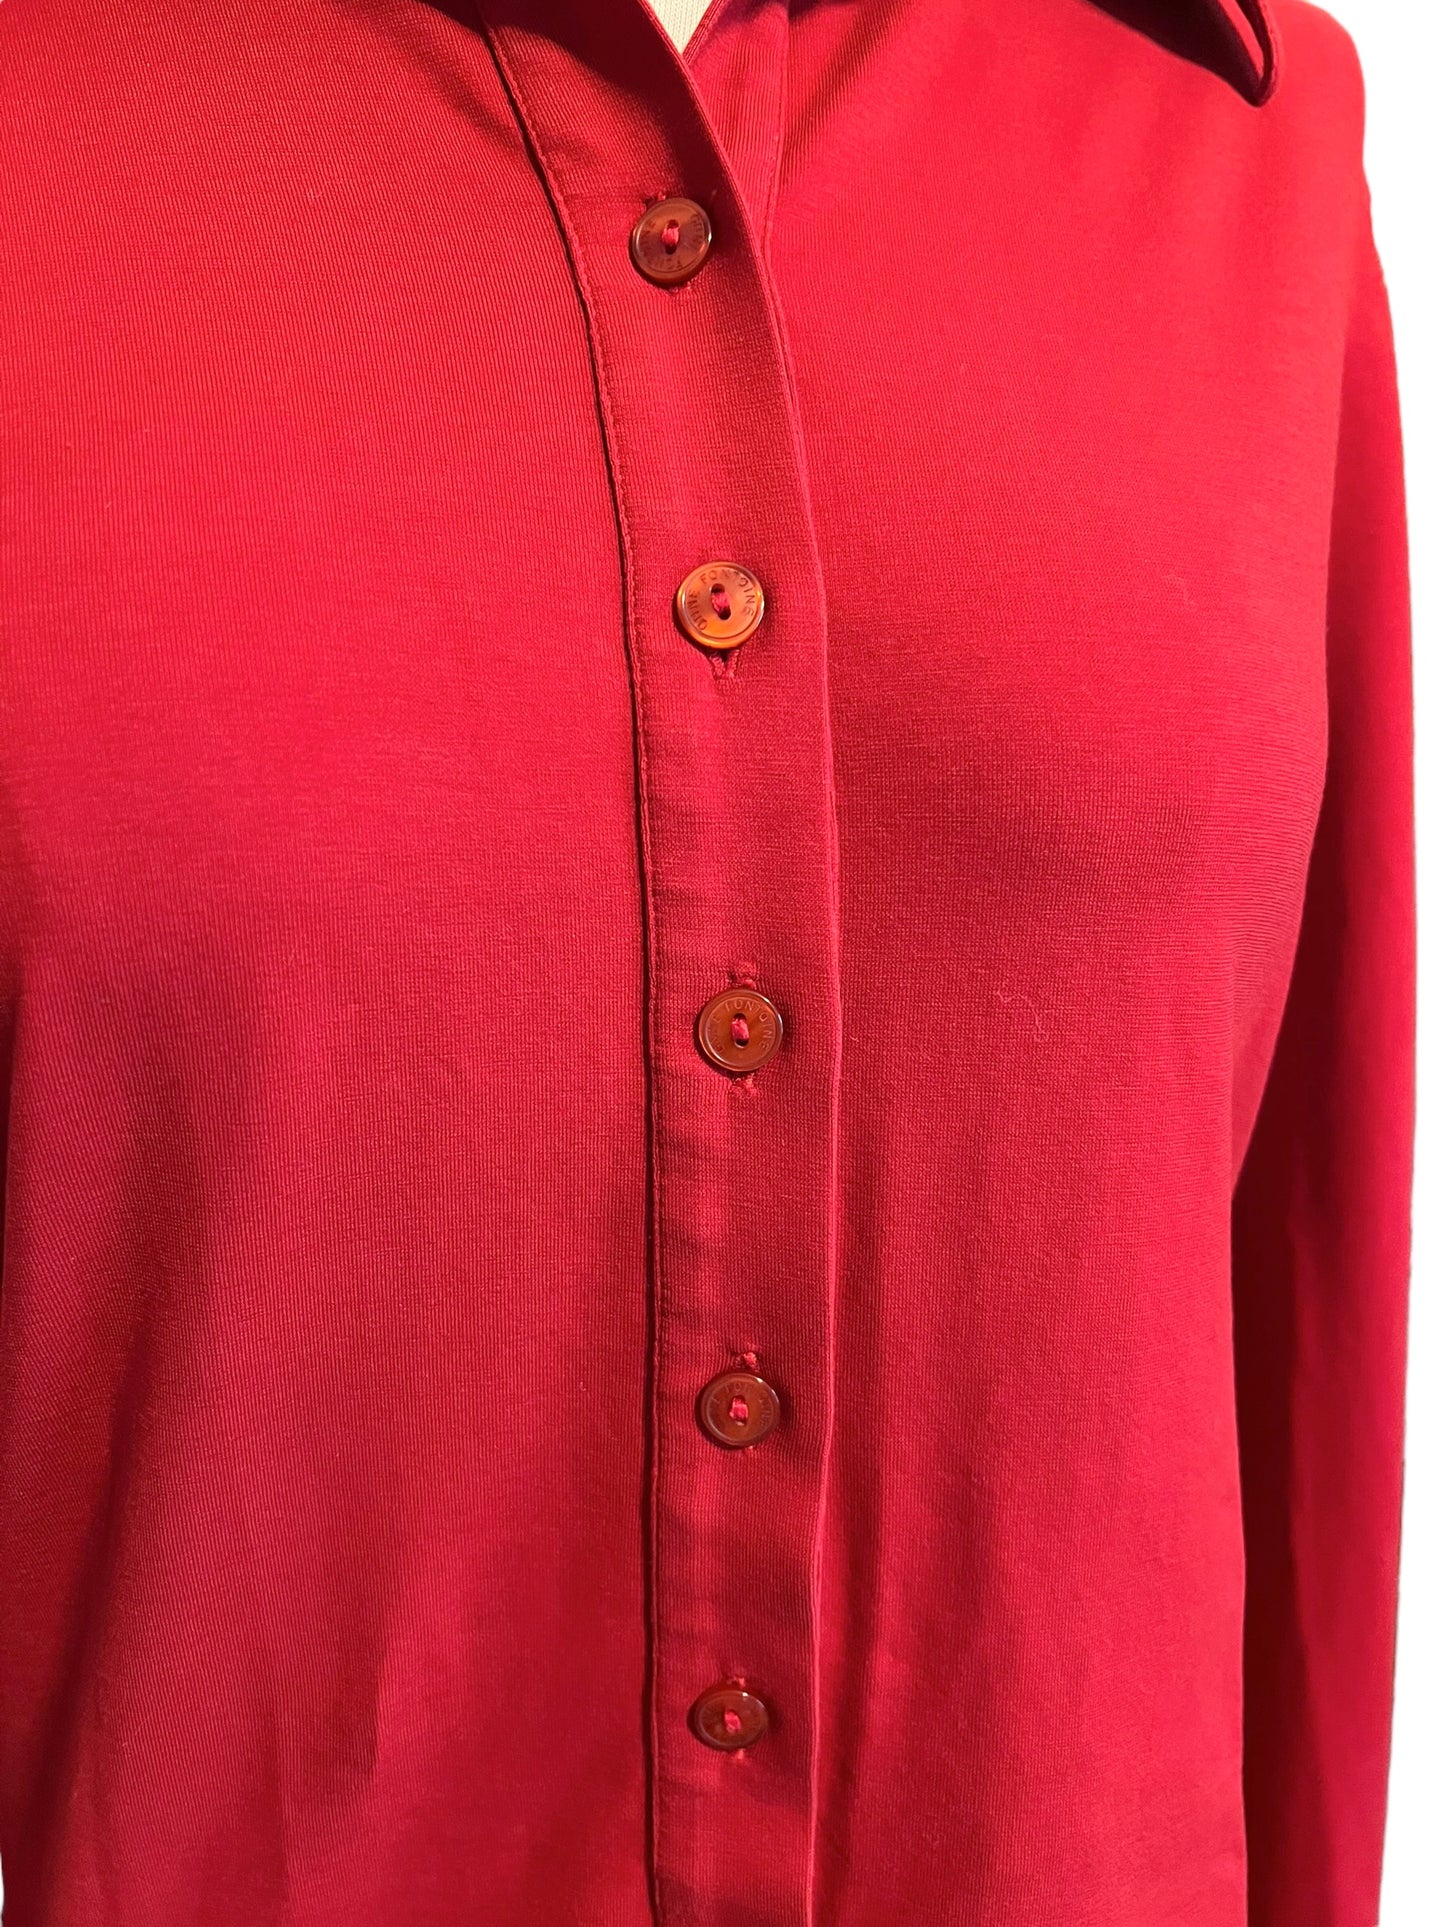 Anne Fontaine Size 42 Red Nuage Shirt